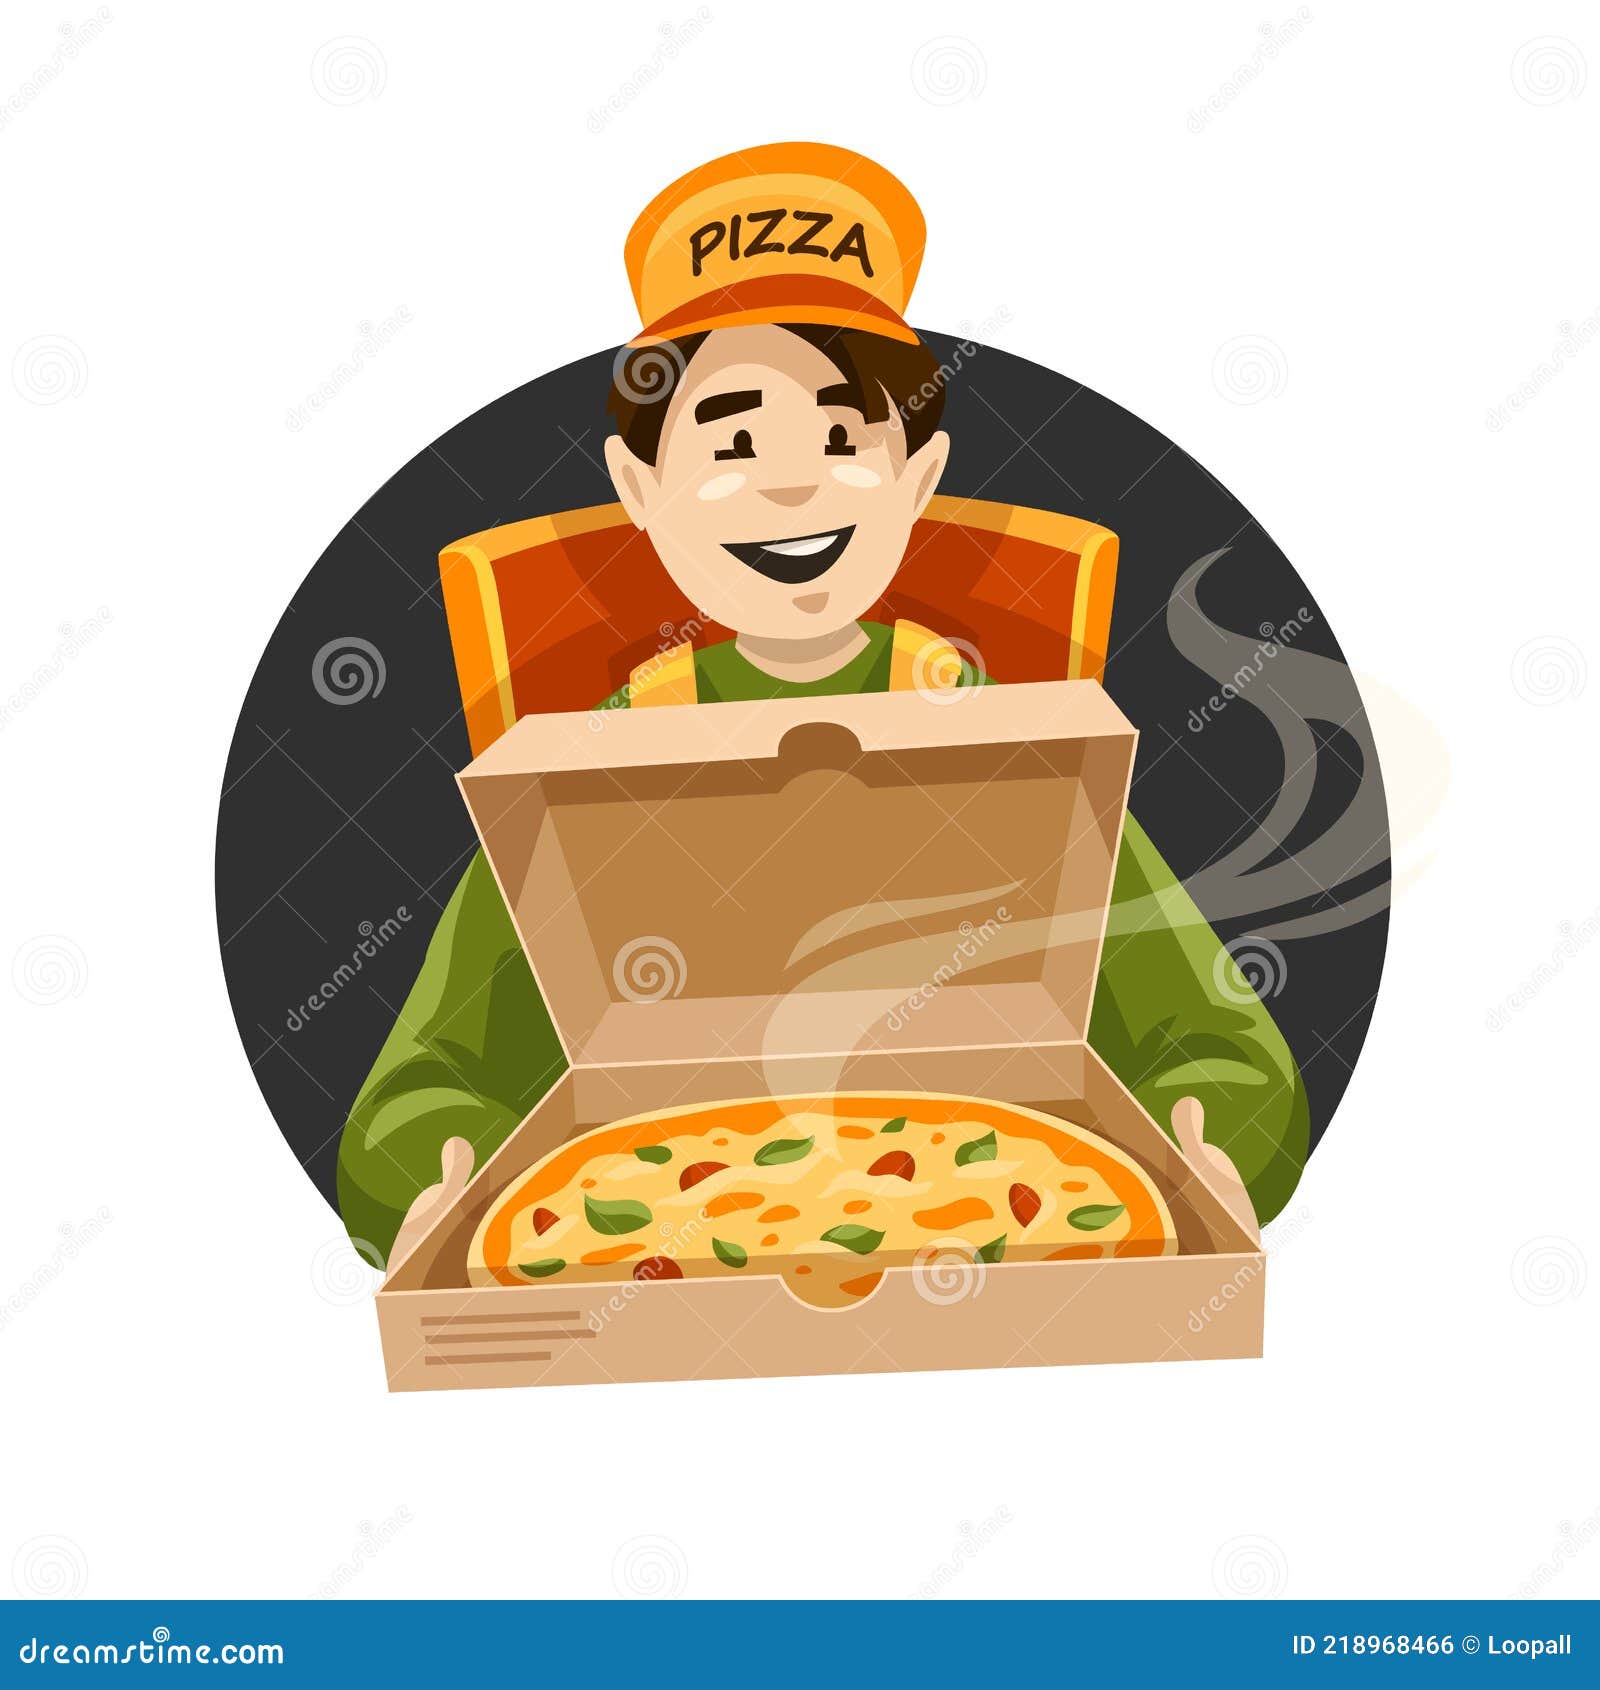 Pizza Delivery Courier Box. Cartoon Character Pizzeria Order. Illustration.  Stock Vector - Illustration of destination, deliveryman: 218968466